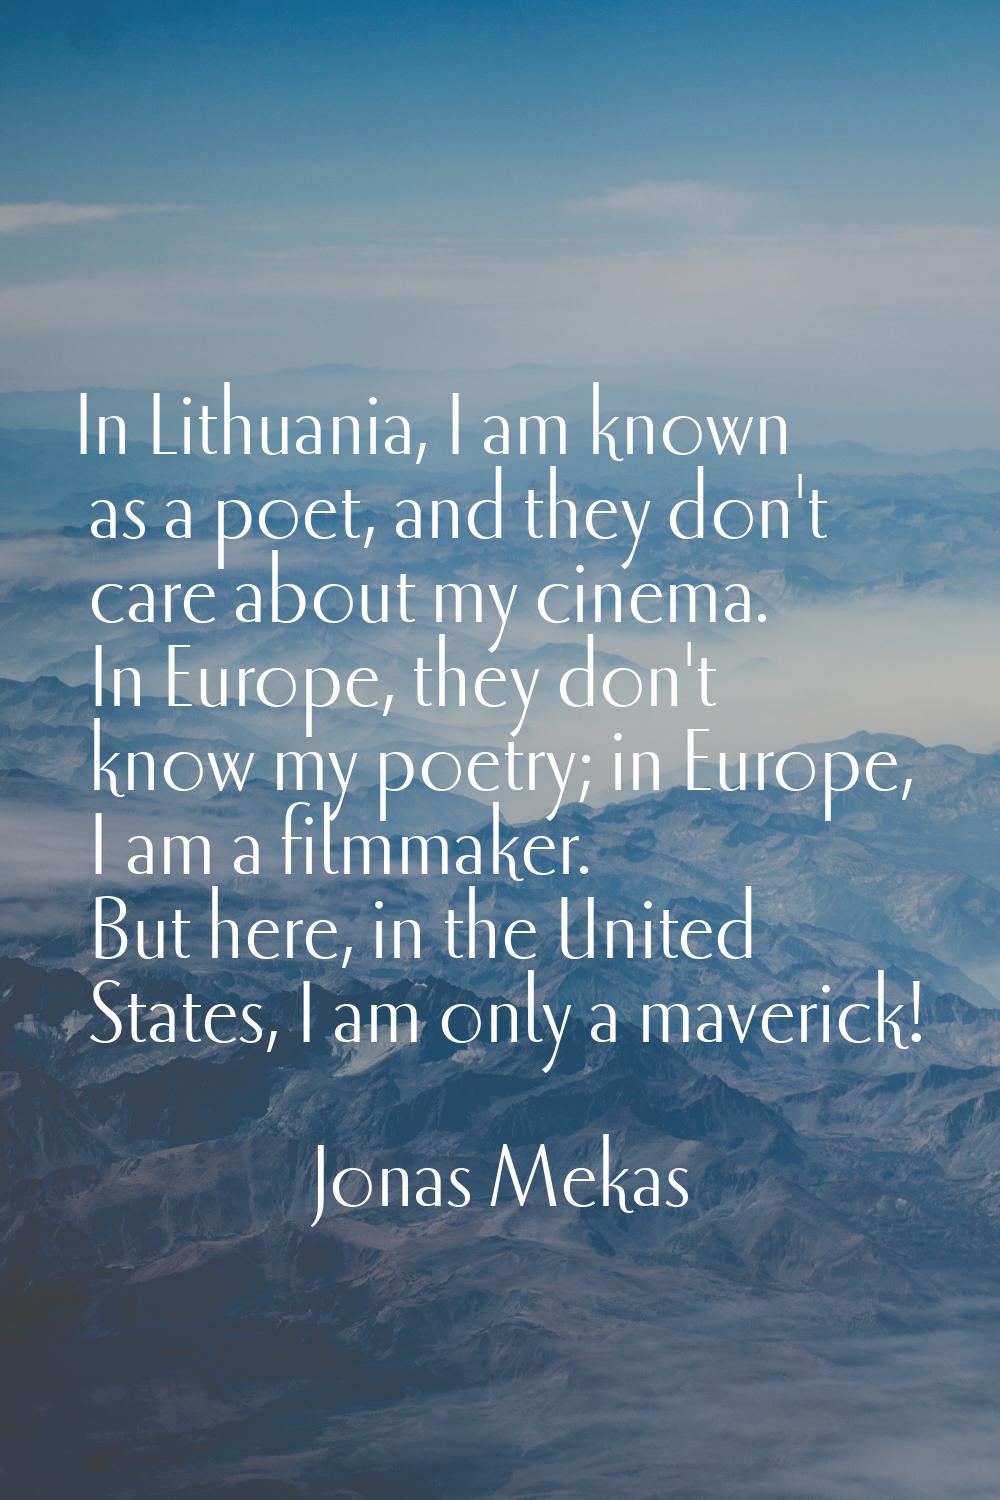 In Lithuania, I am known as a poet, and they don't care about my cinema. In Europe, they don't know